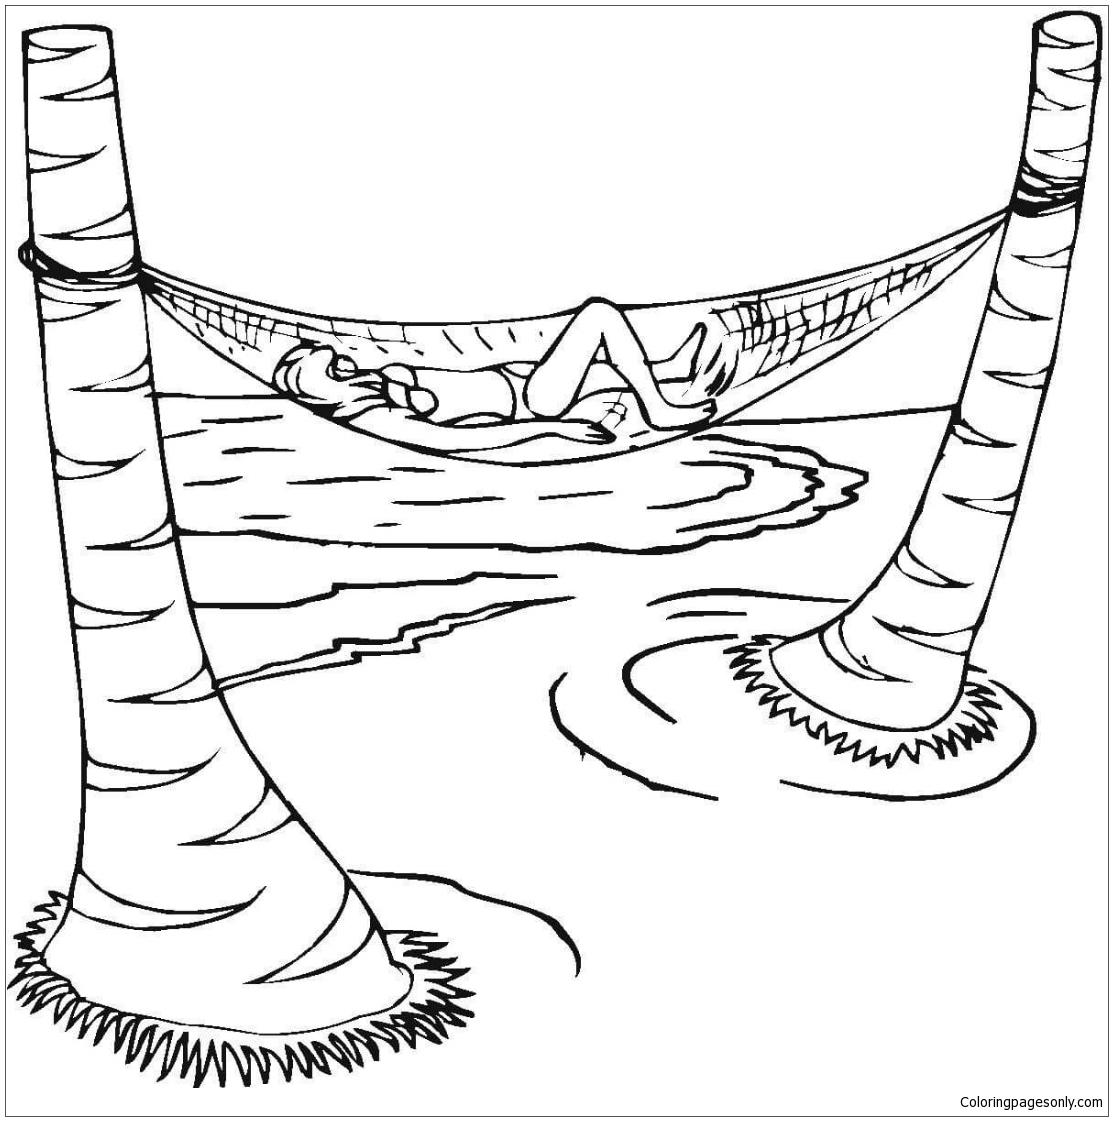 Summer Vacation With A Hammock Coloring Pages - Nature & Seasons